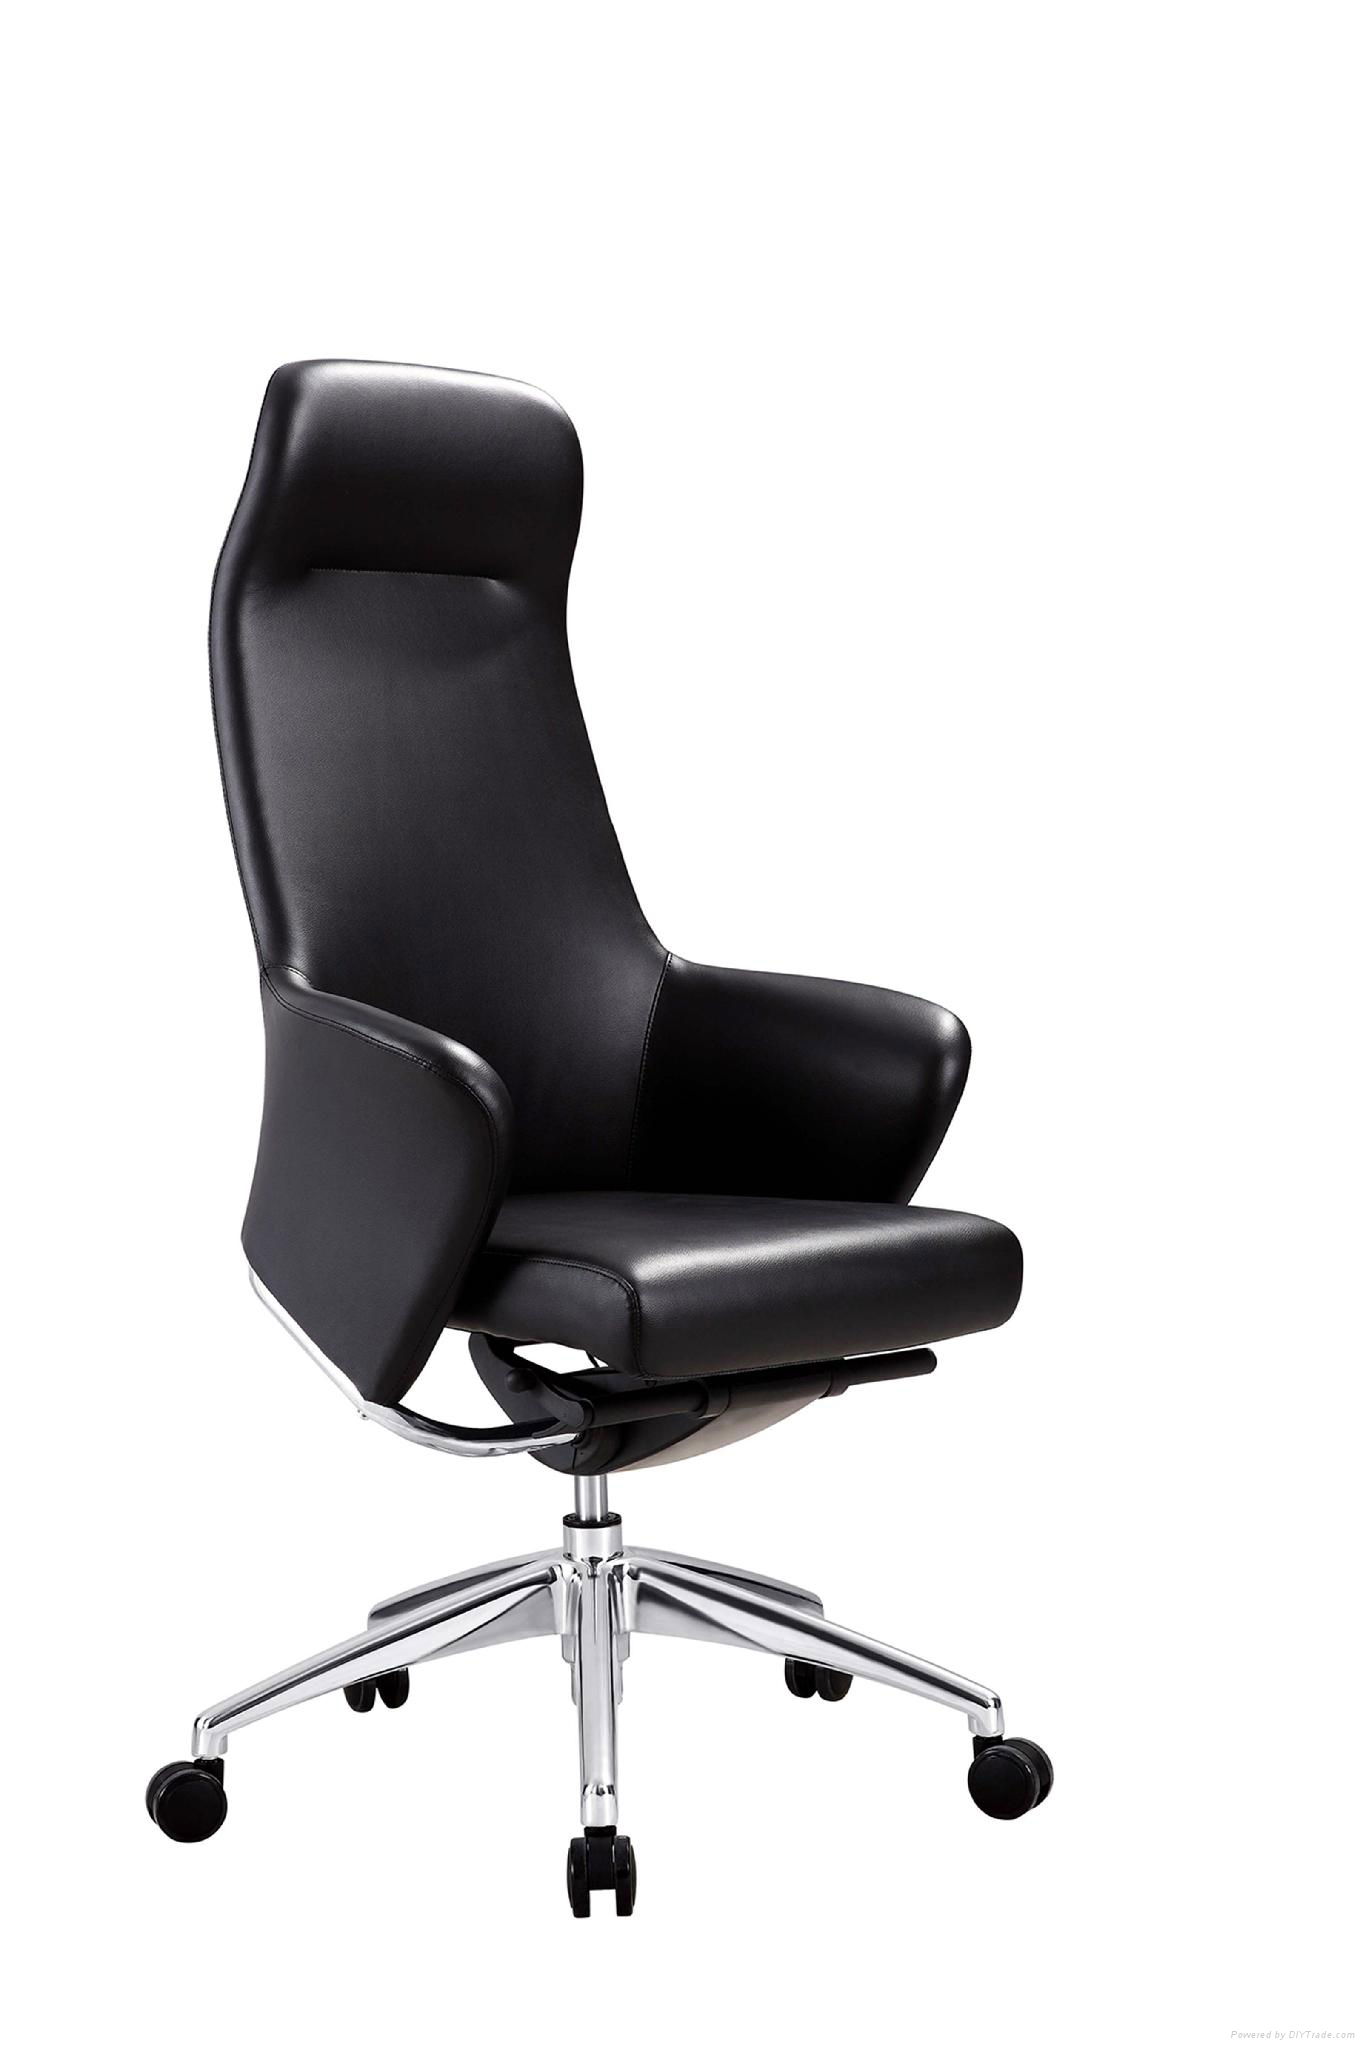 luxury office chair with wheels 2